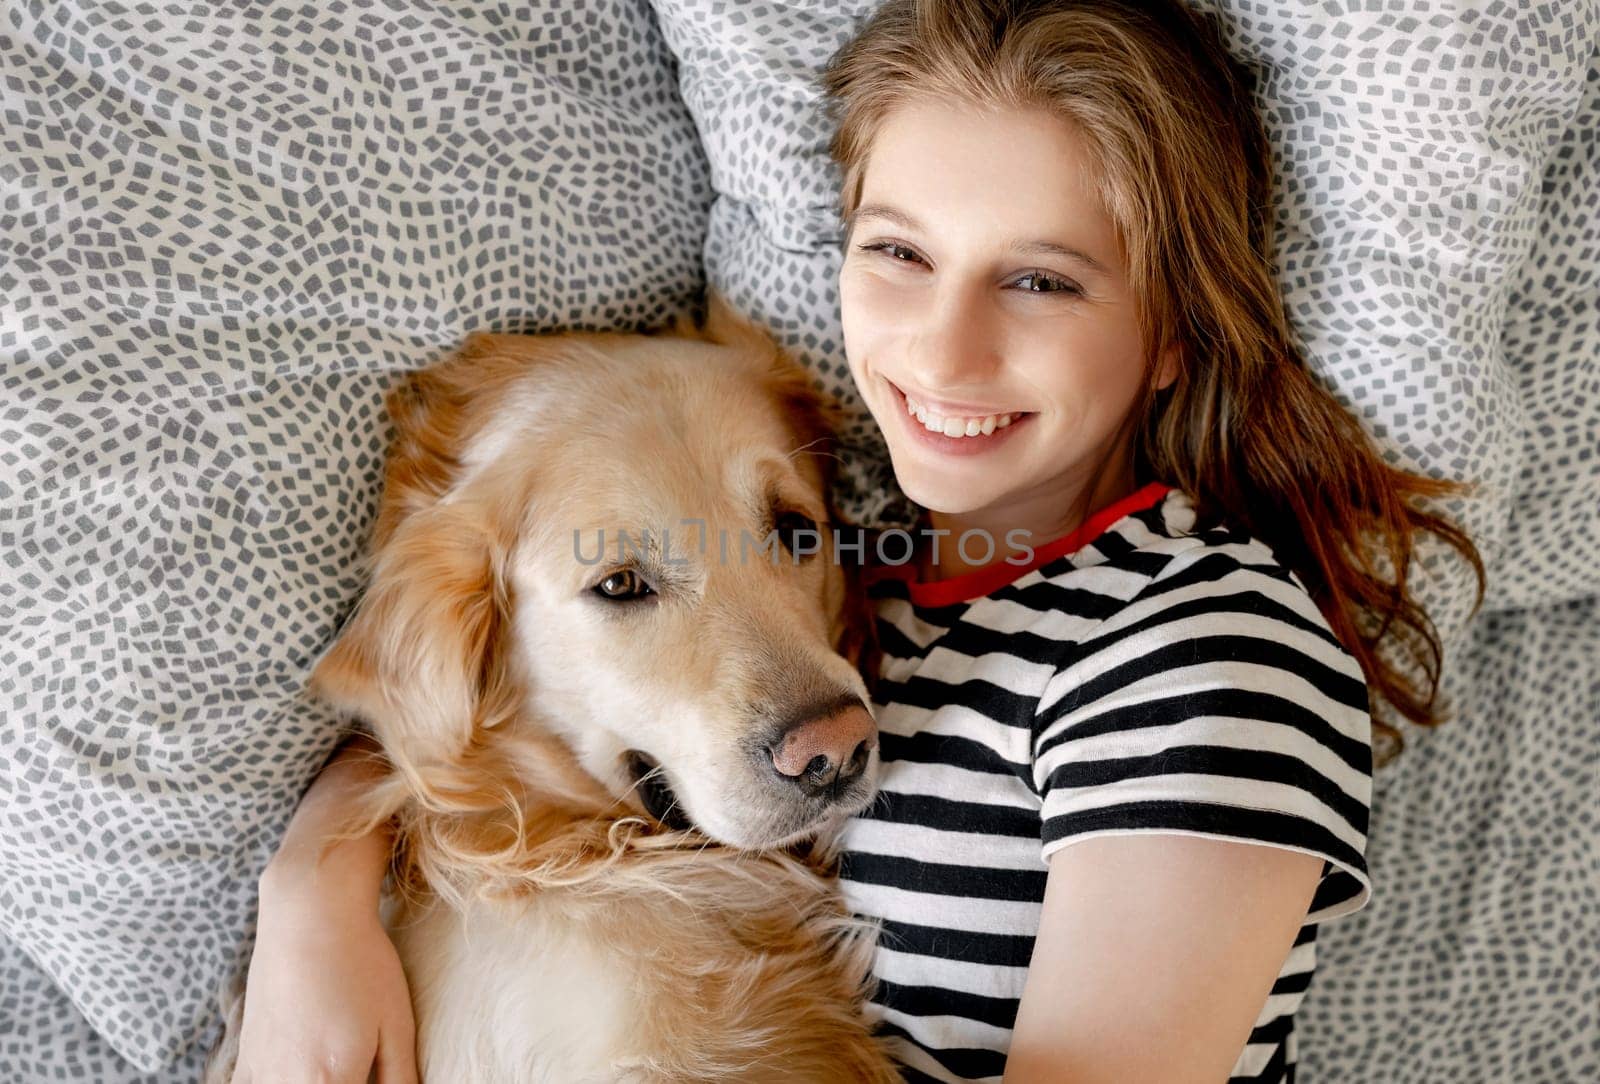 Pretty girl hugging golden retriever dog and smiling lying in bed. Happy teenager with purebred doggy pet labrador resting together